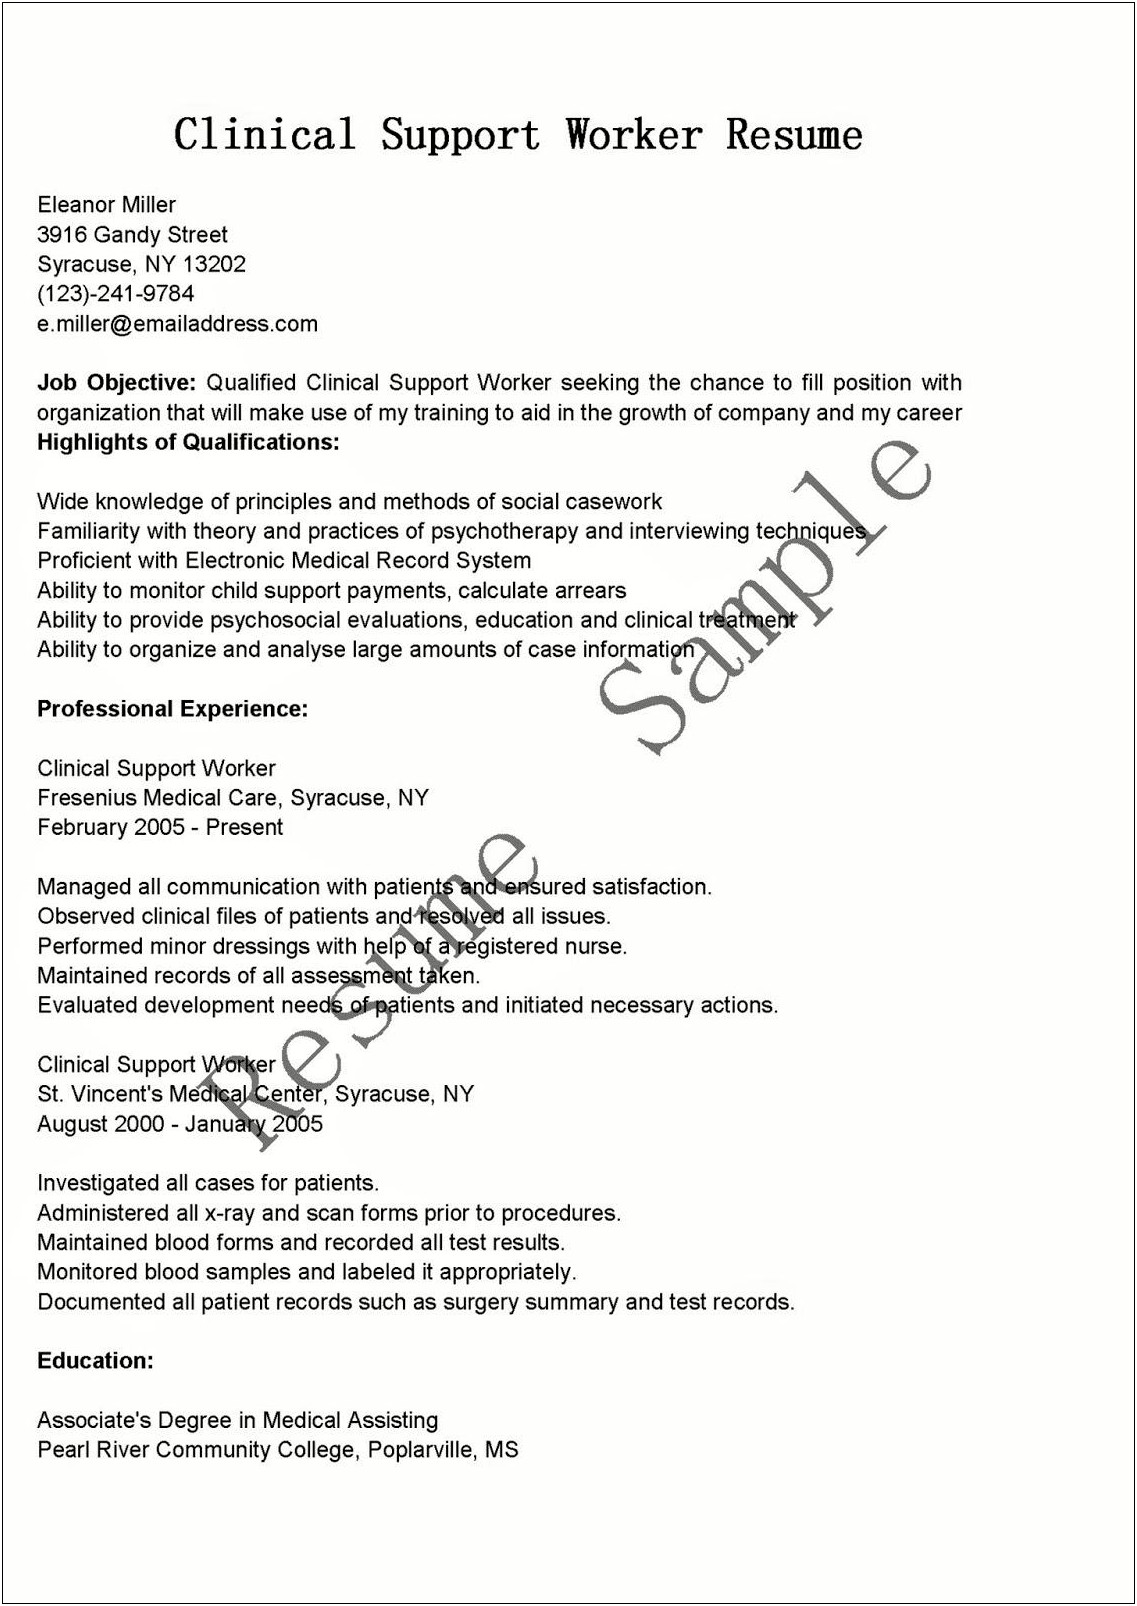 Personal Support Worker Resume Objective